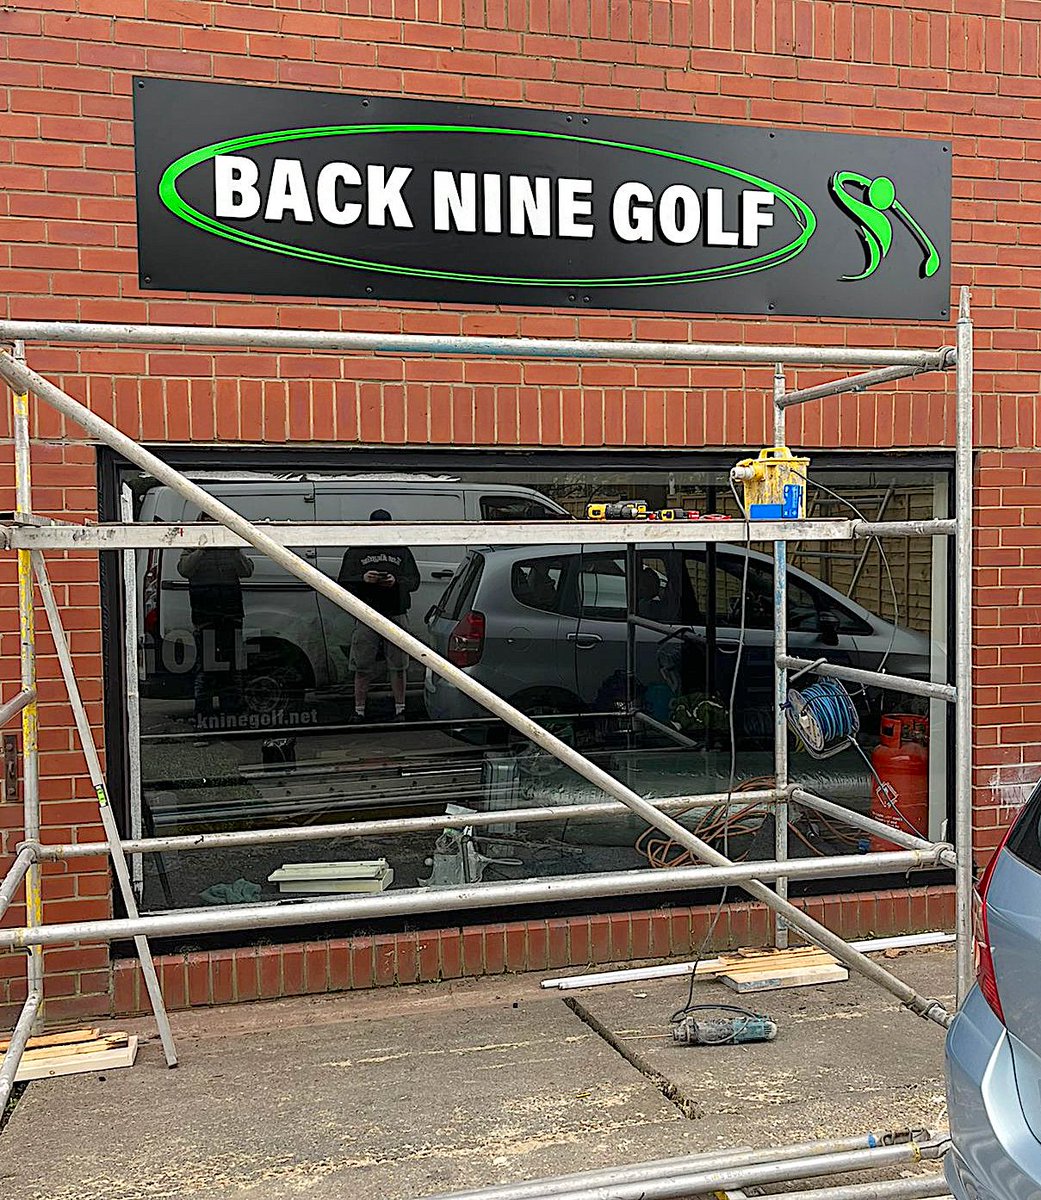 The signage has gone up today at Back Nine Golf in Otley ahead of the official opening on Friday, May 3rd. You can book ahead at backninegolf.net for either of our Trackman golf simulators, interactive darts lanes or pool table. 
#indoorgolf #golfsimulator #darts #Pool